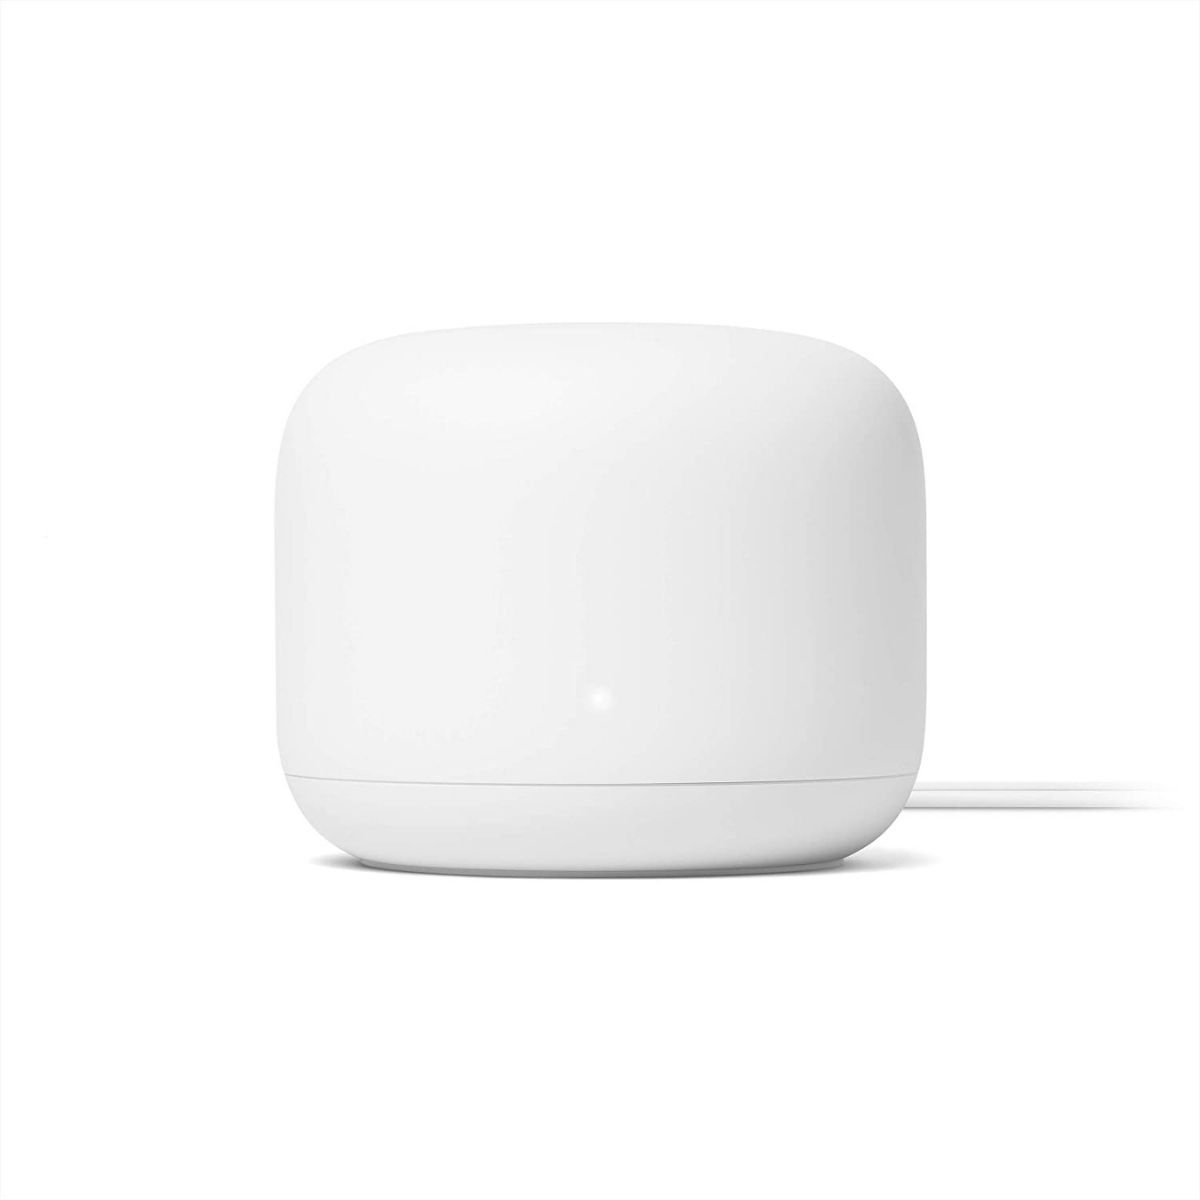 The Best Home Office Gifts Option: Google Nest Wifi - AC2200 - Wifi Router System